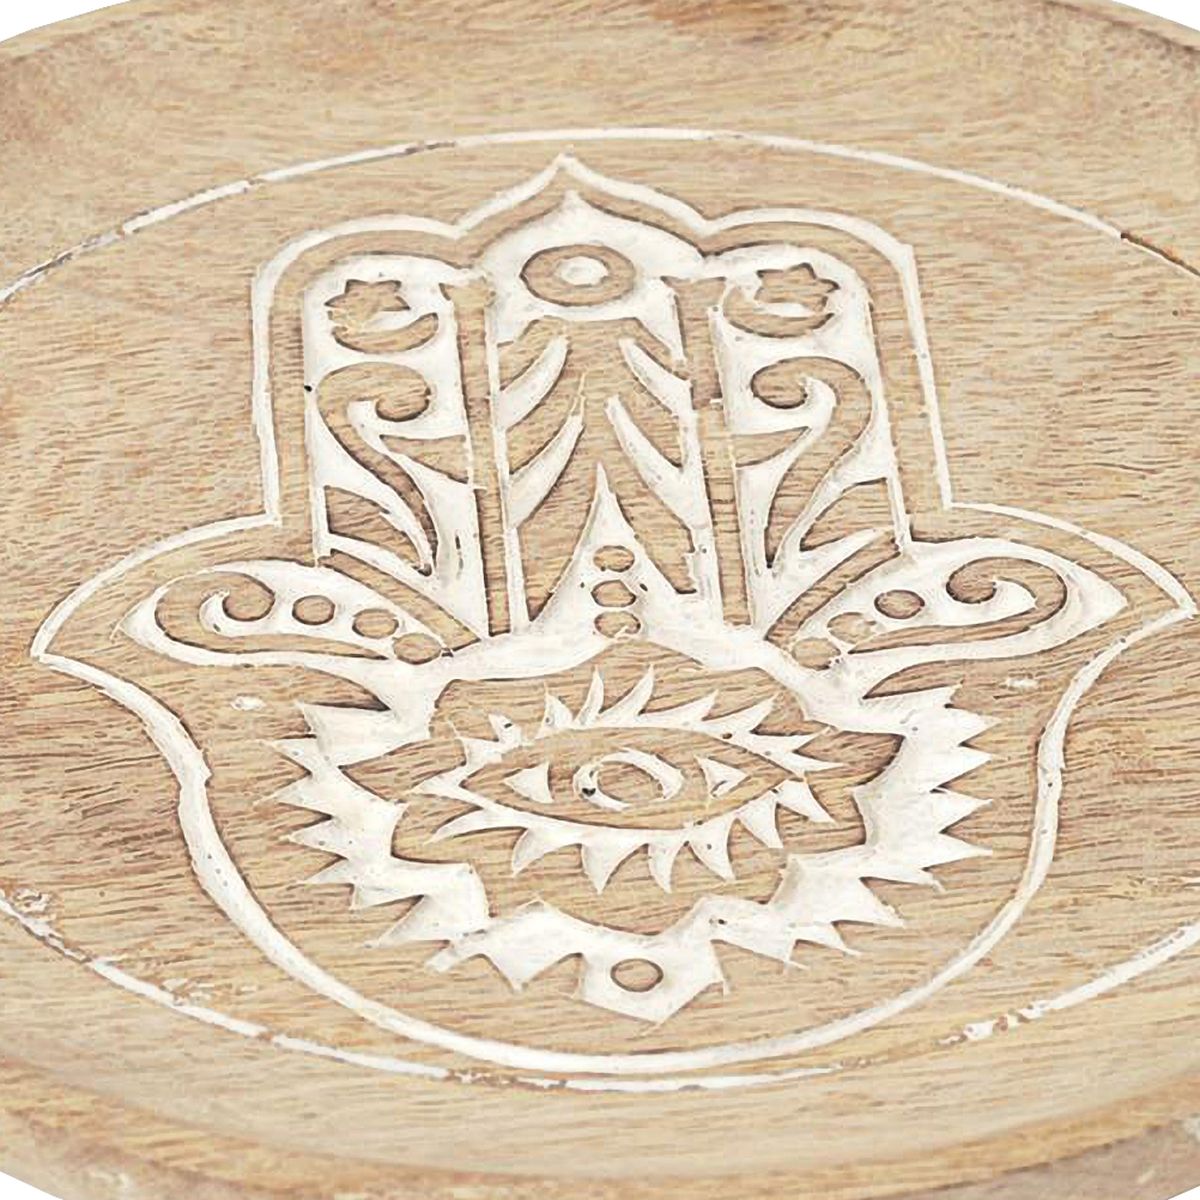 Hand of Fatma tray empty pocket carved wood pattern 20.5 cm